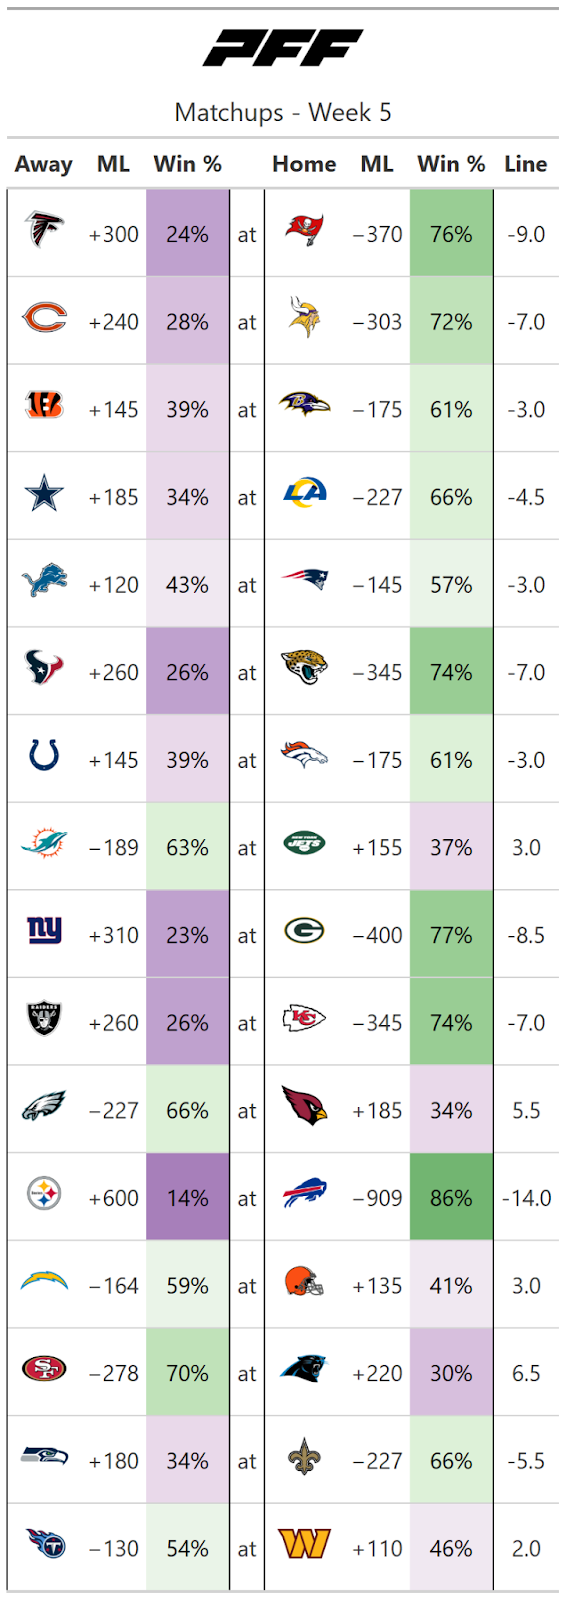 nfl odds and lines